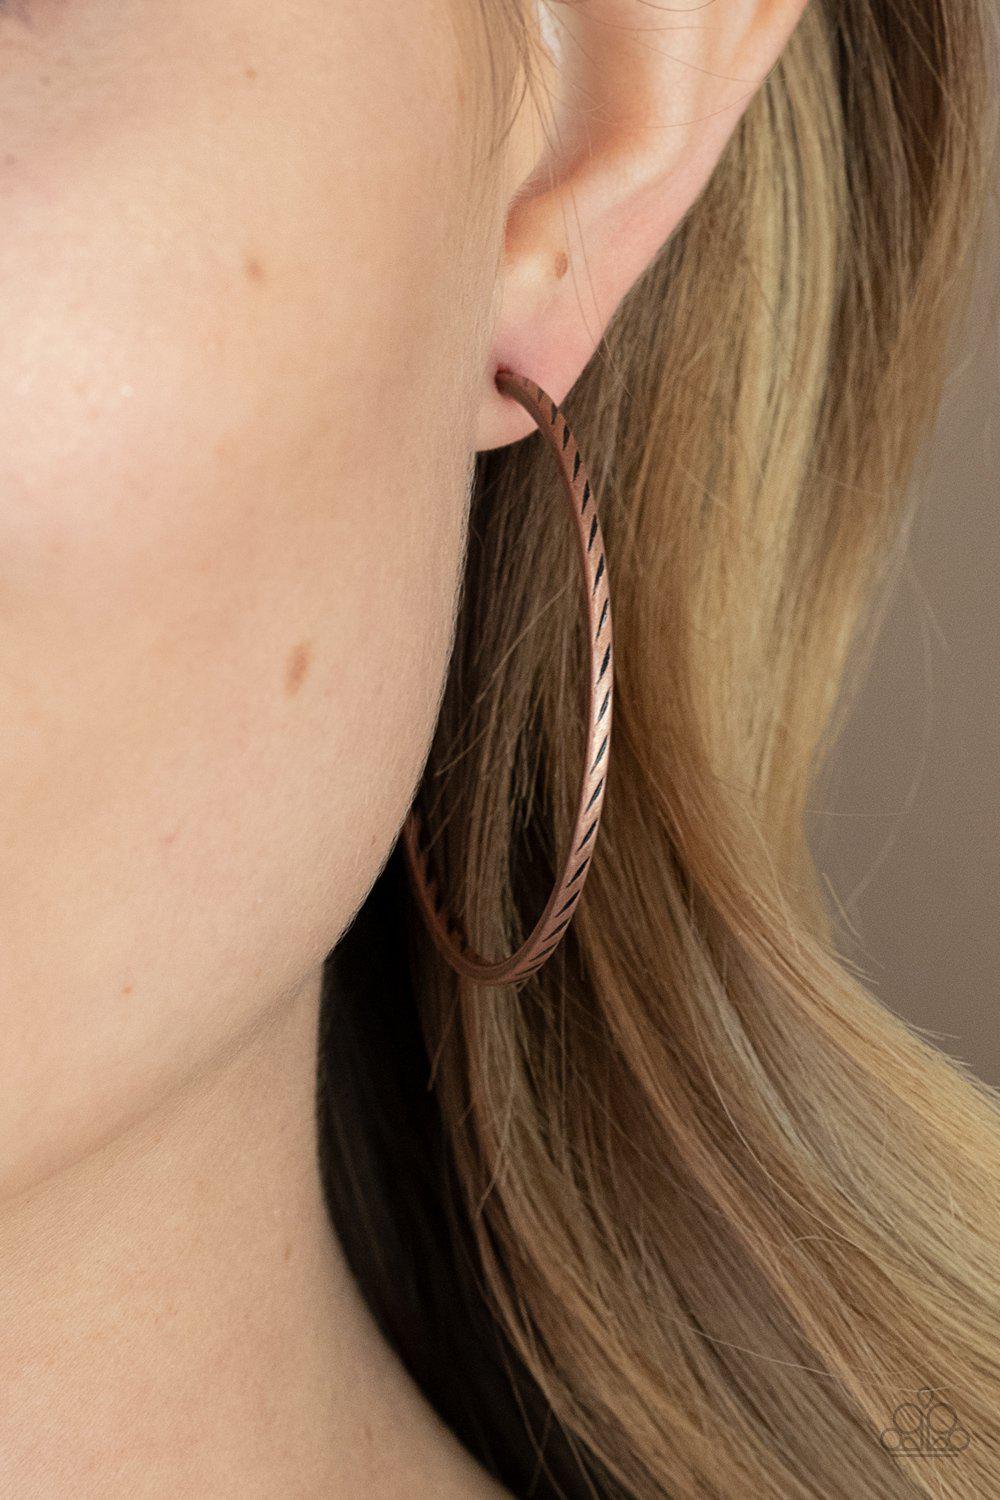 Rural Reserve Copper Hoop Earrings - Paparazzi Accessories- lightbox - CarasShop.com - $5 Jewelry by Cara Jewels